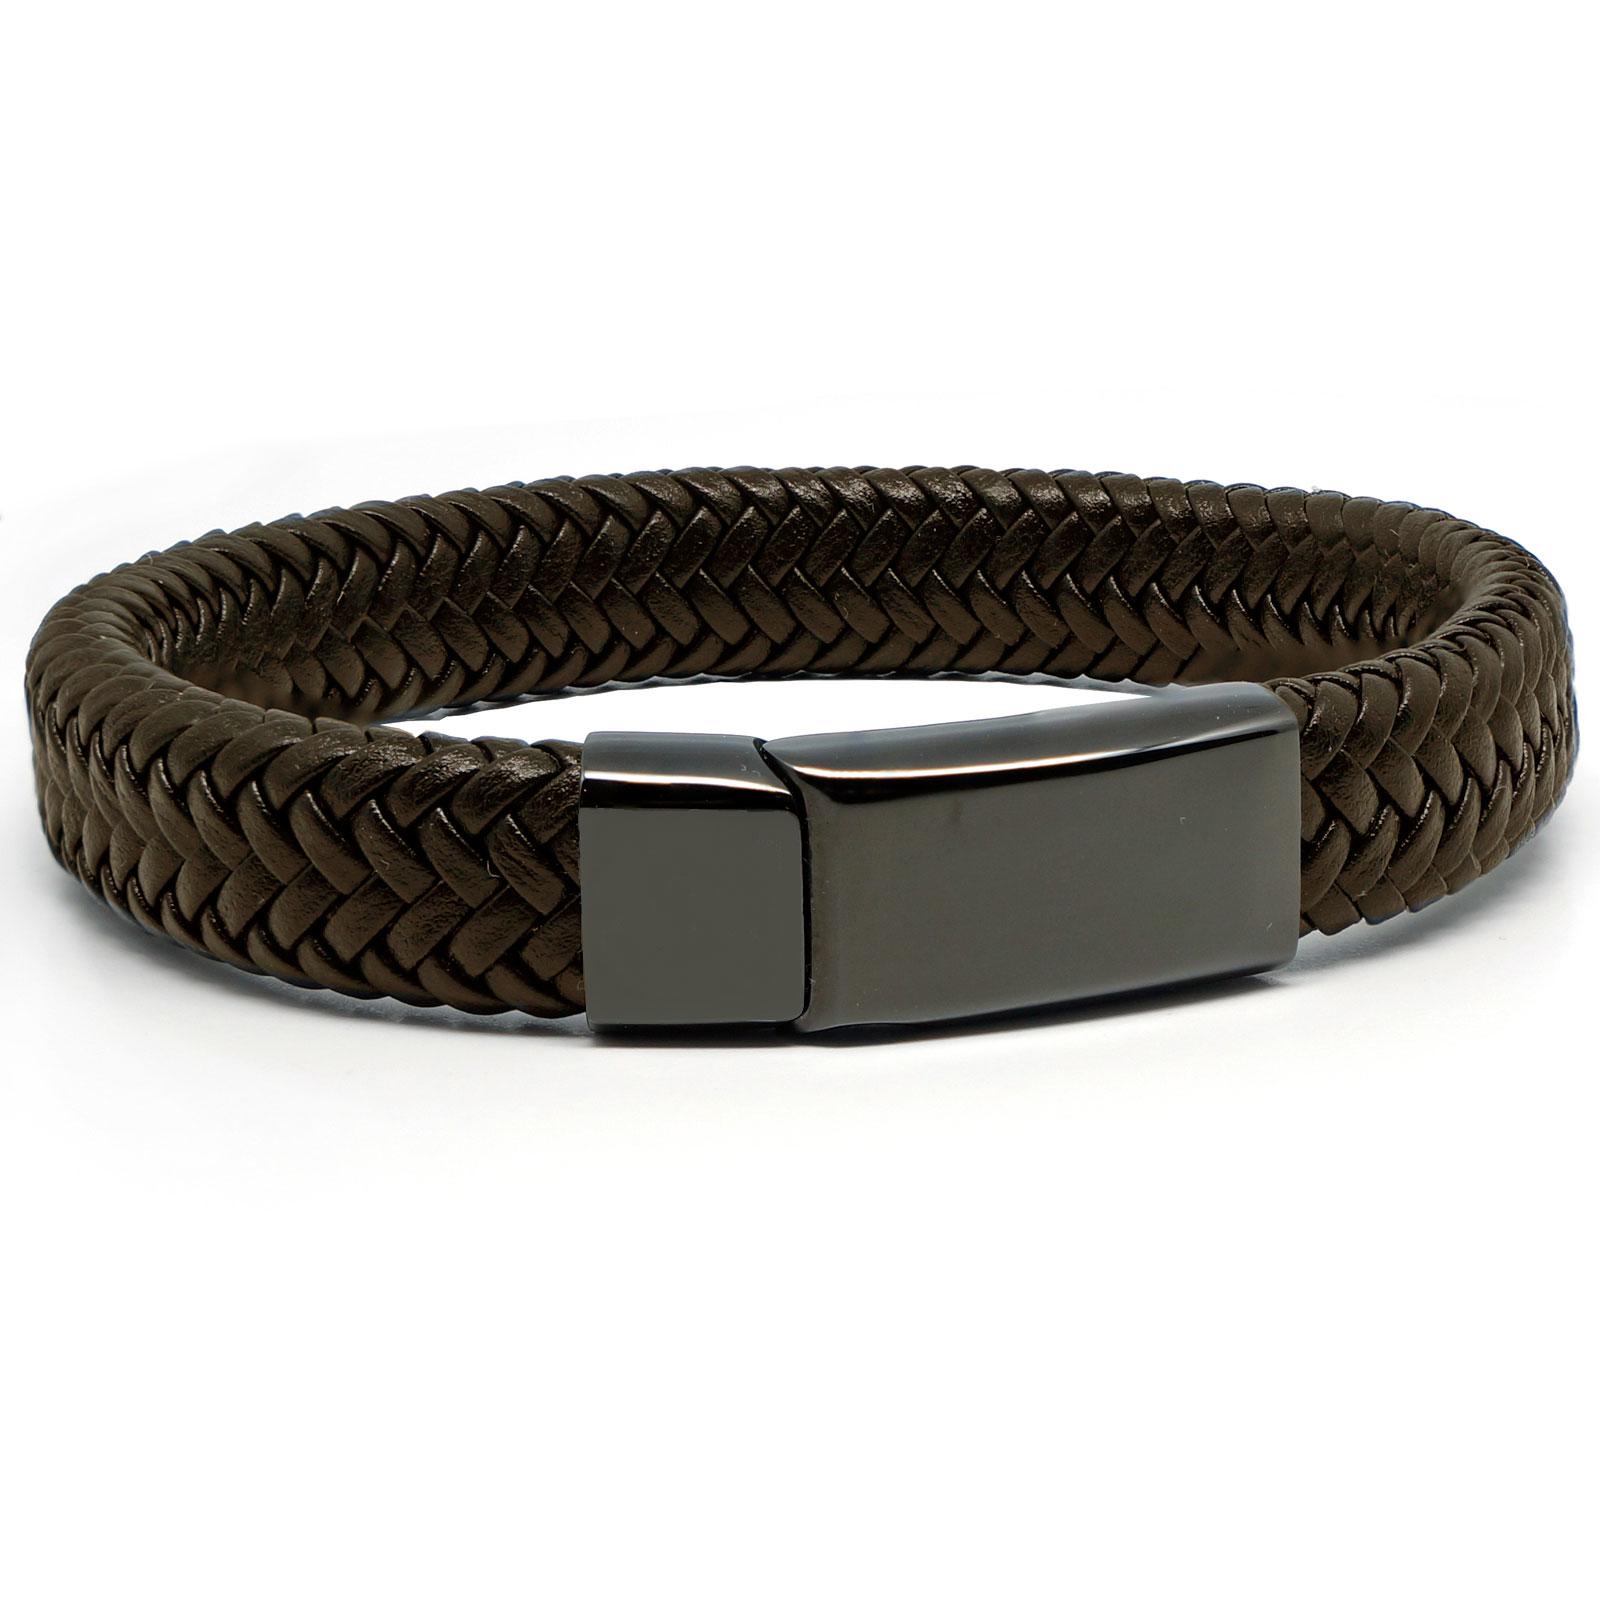 Chunky Black Super Soft Premium Leather Bracelet with a Silver Sliding Magnetic Clasp.